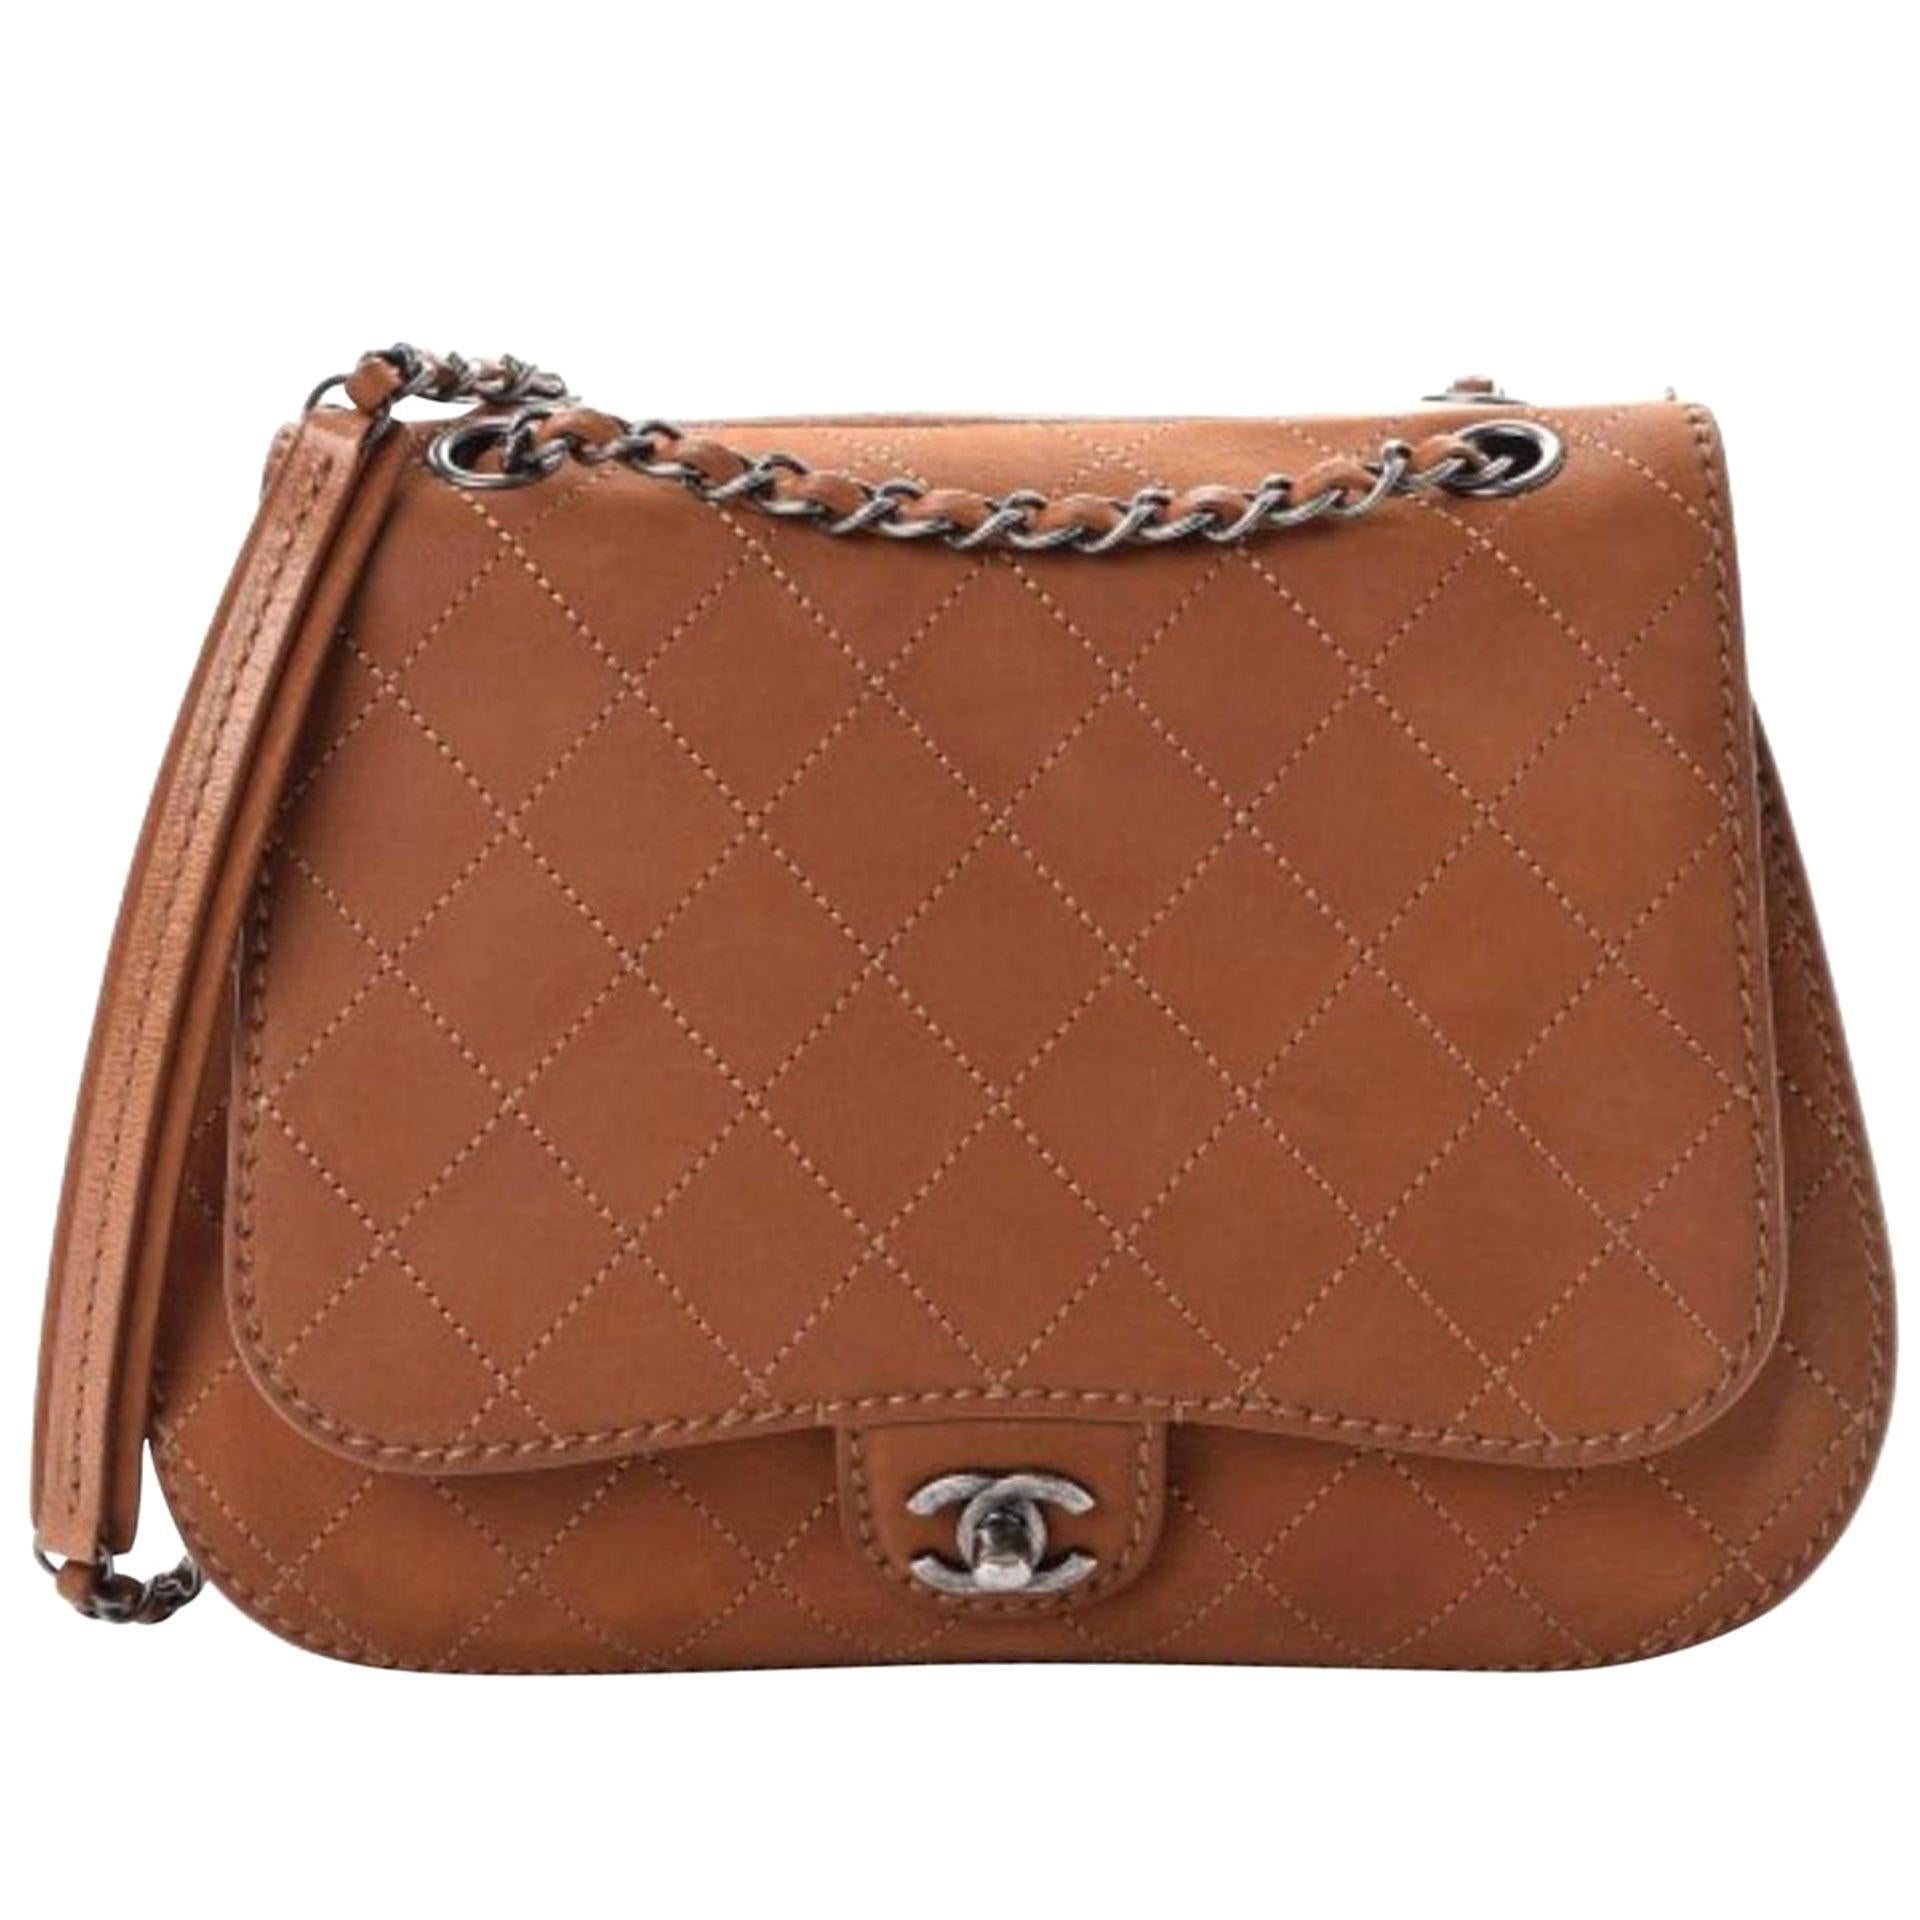 brown chanel classic flap